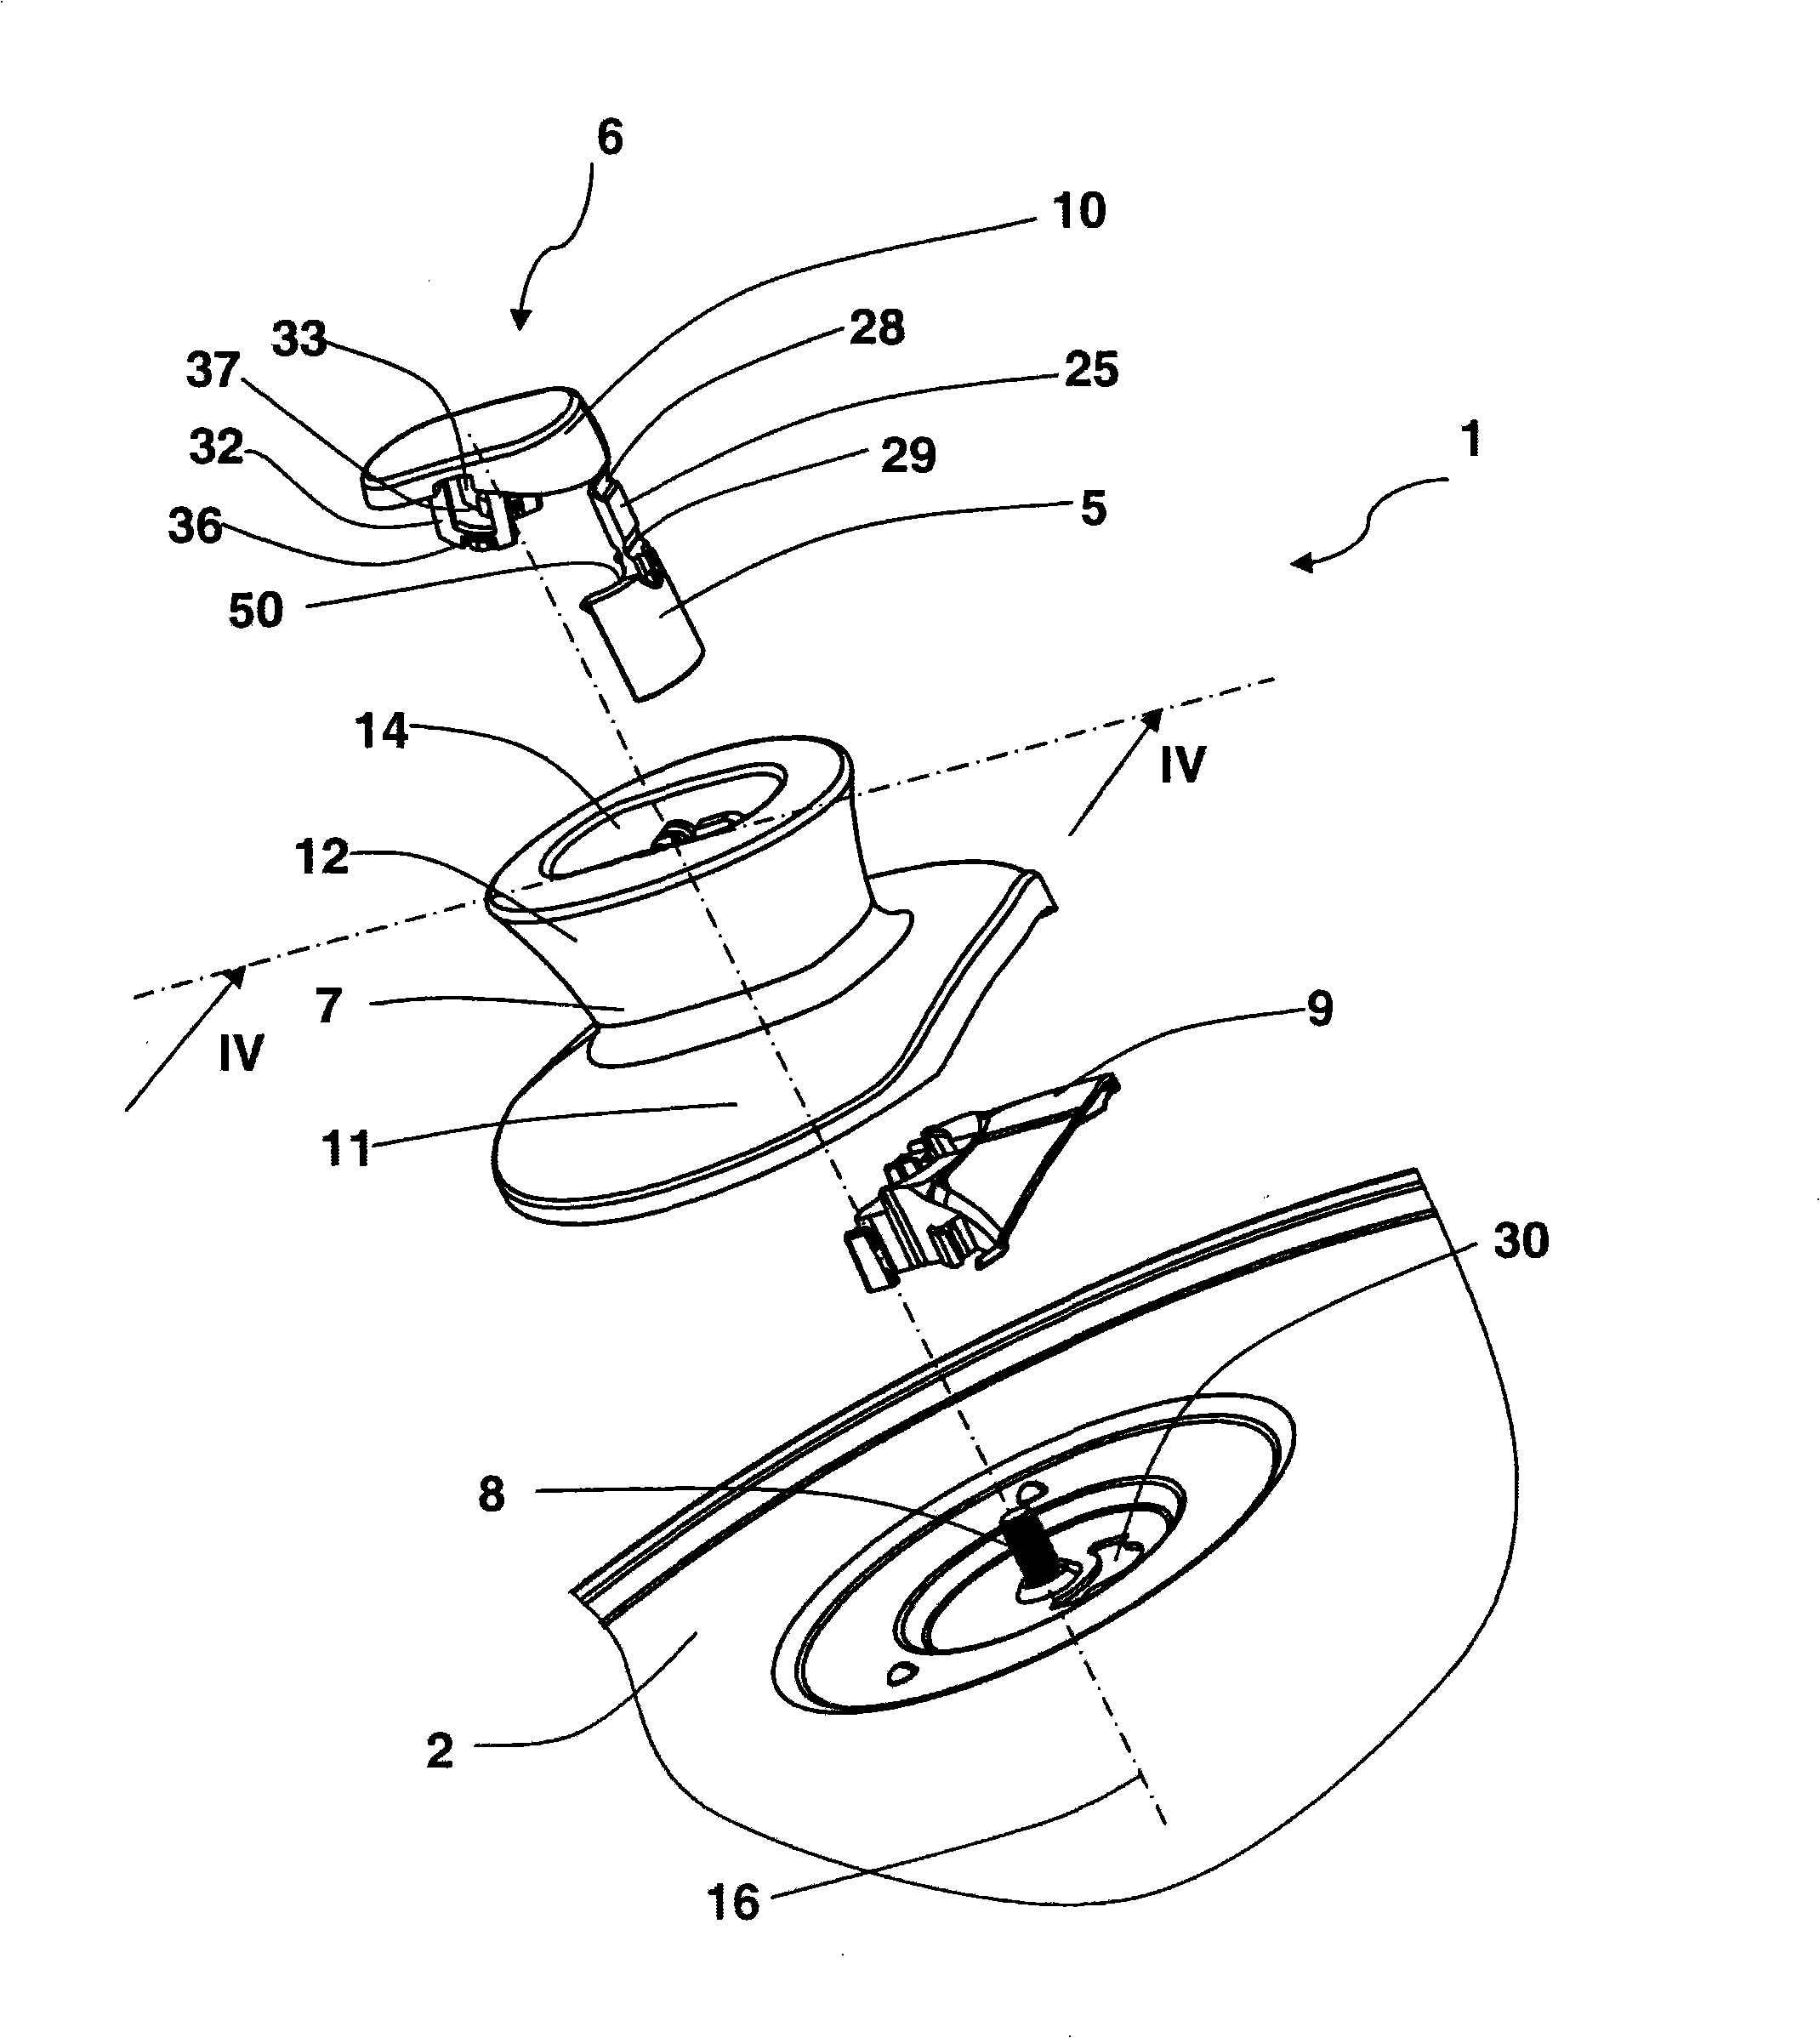 Steam discharge device for a lid of a cooking utensil